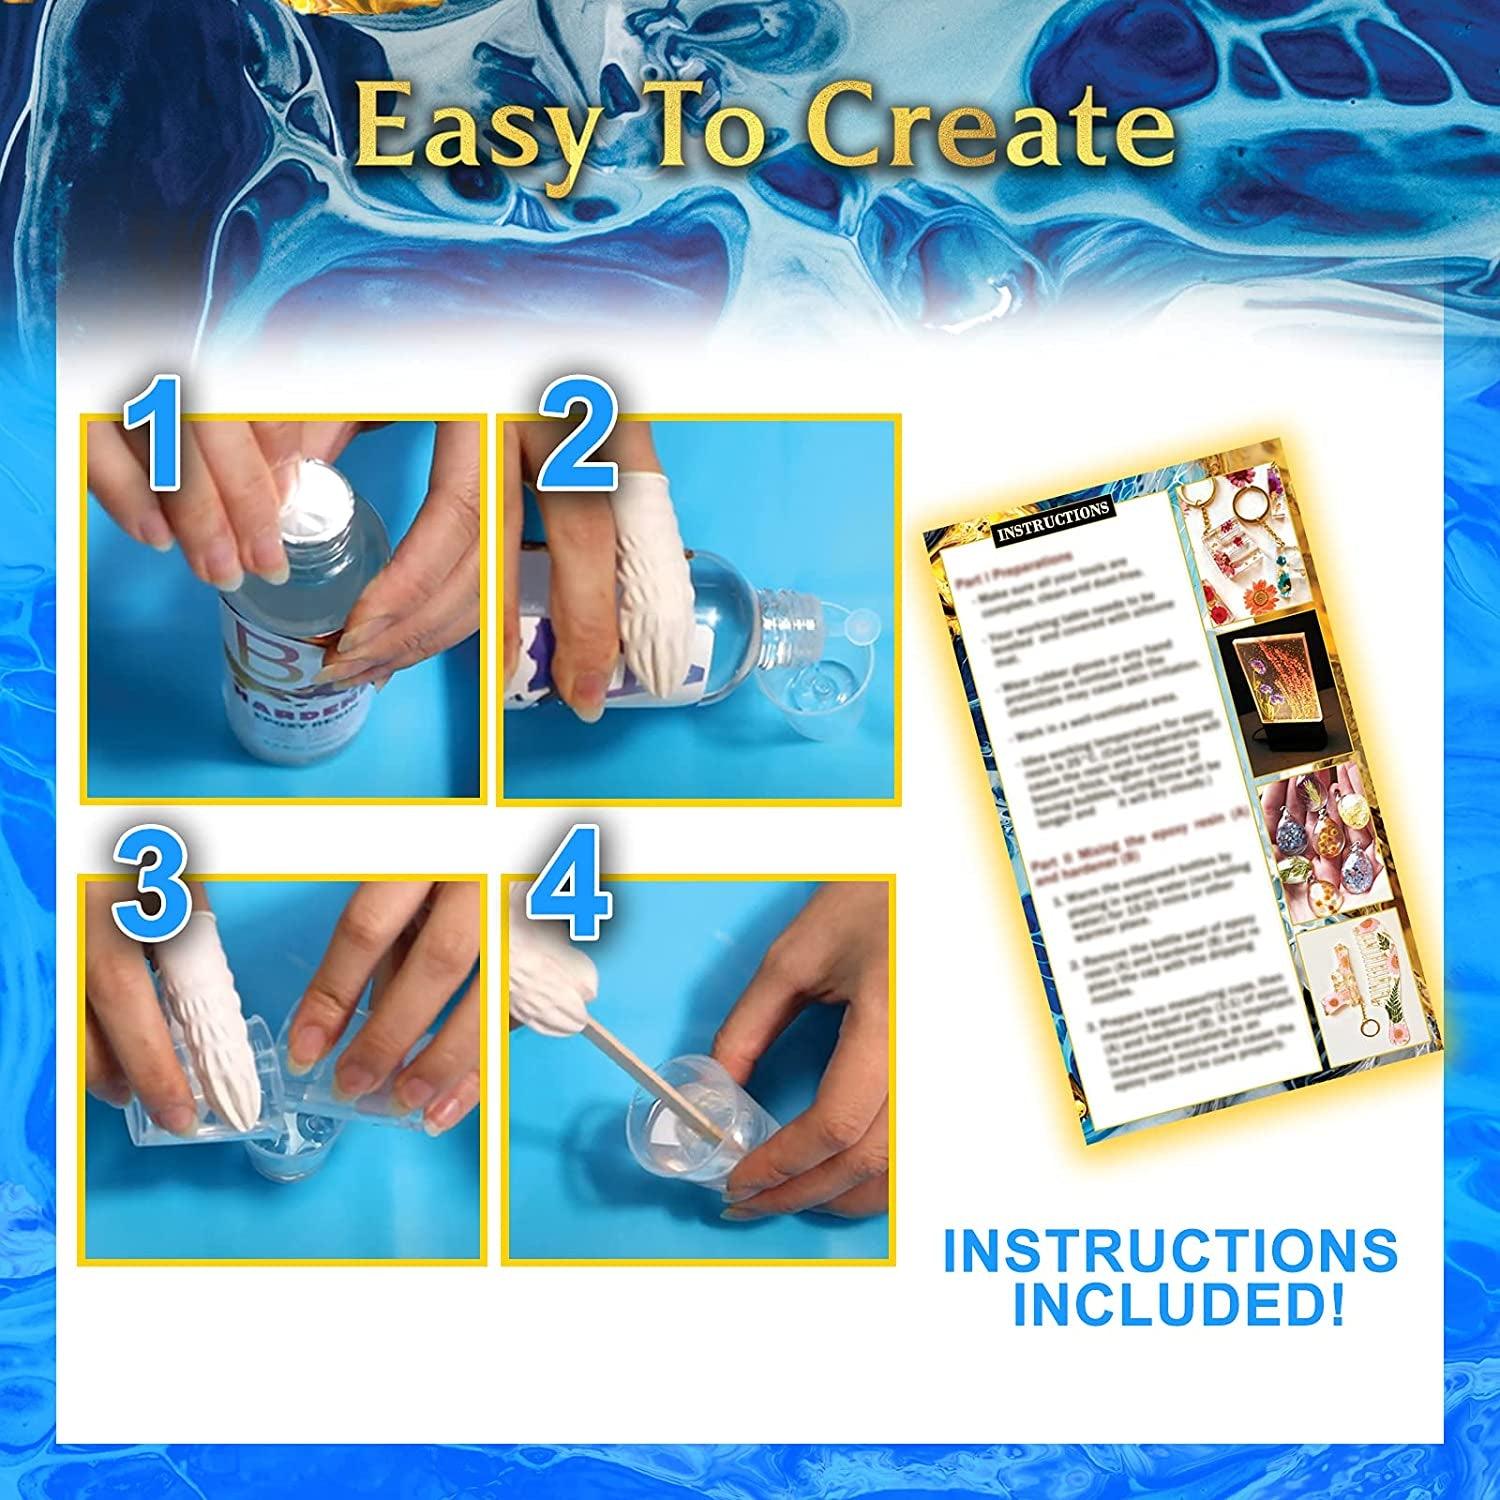 Epoxy Resin Art Kit Supplies Charms and Perfect Arts & Crafts and Material  Set for Nail Jewelry Making Glitter